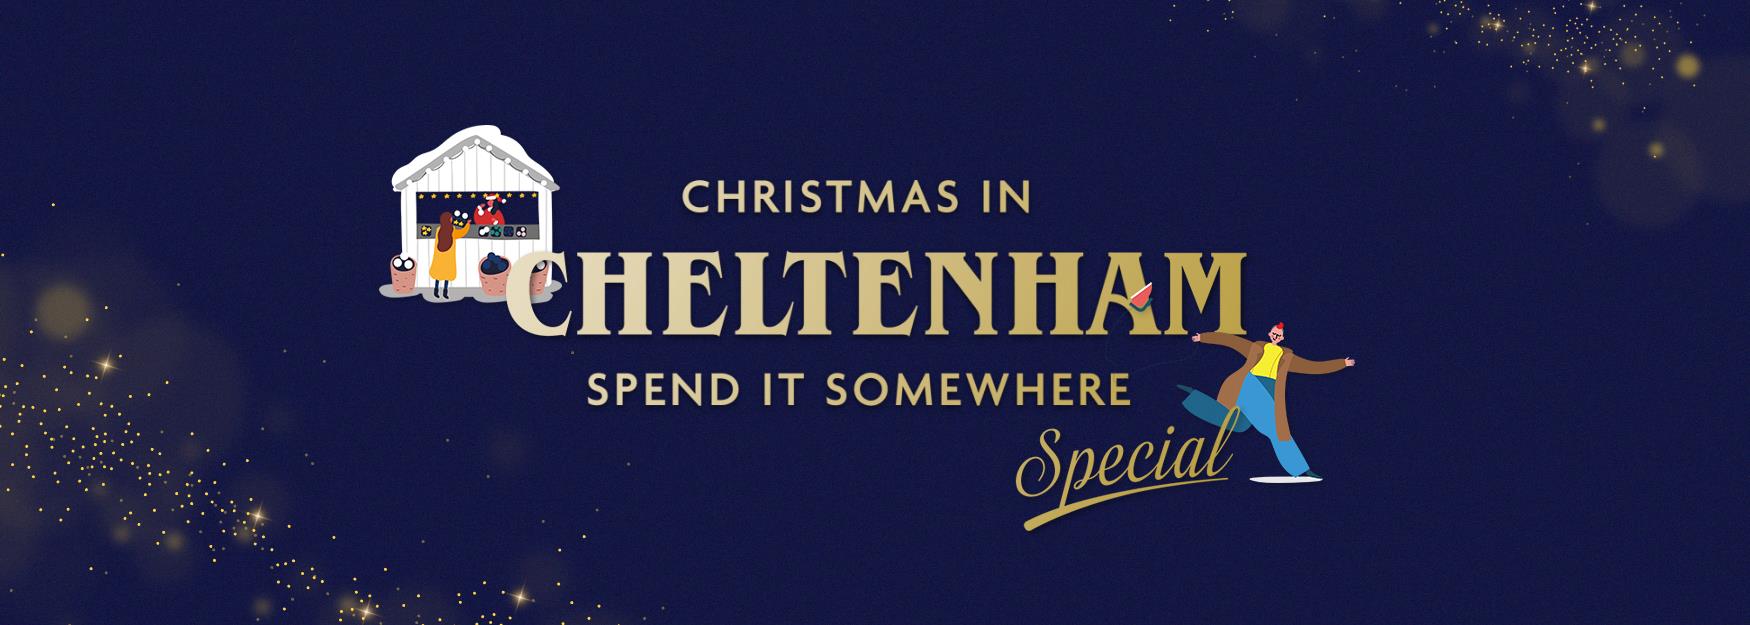 Spend it somewhere special text on a dark blue background with sparkles